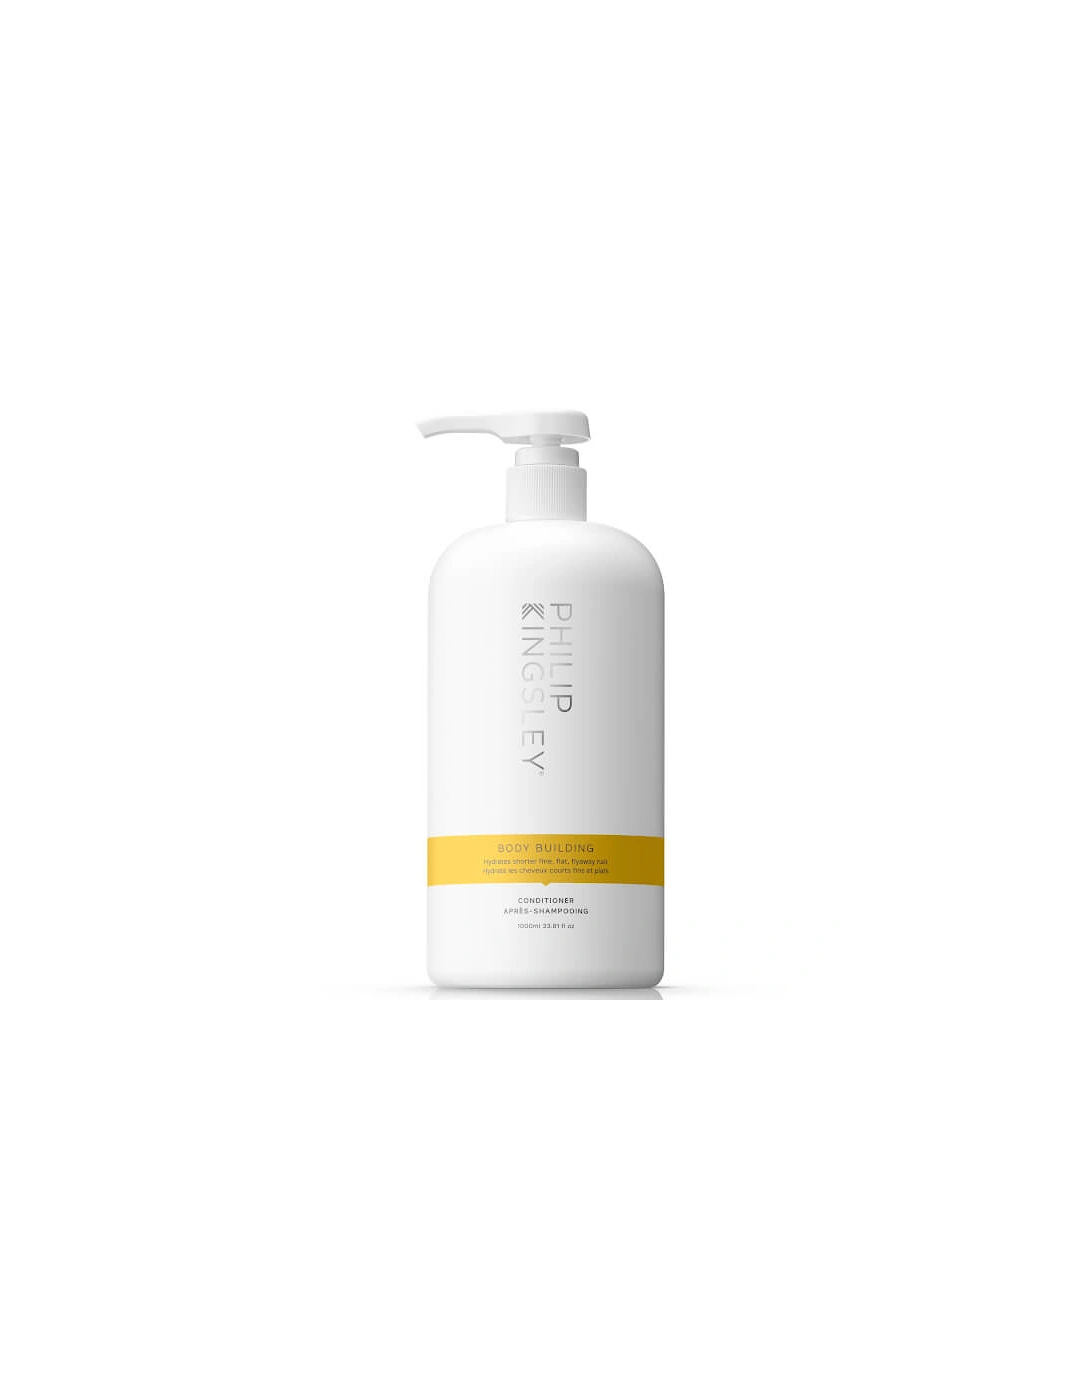 Body Building Conditioner 1000ml (Worth £120.00) - Philip Kingsley, 2 of 1